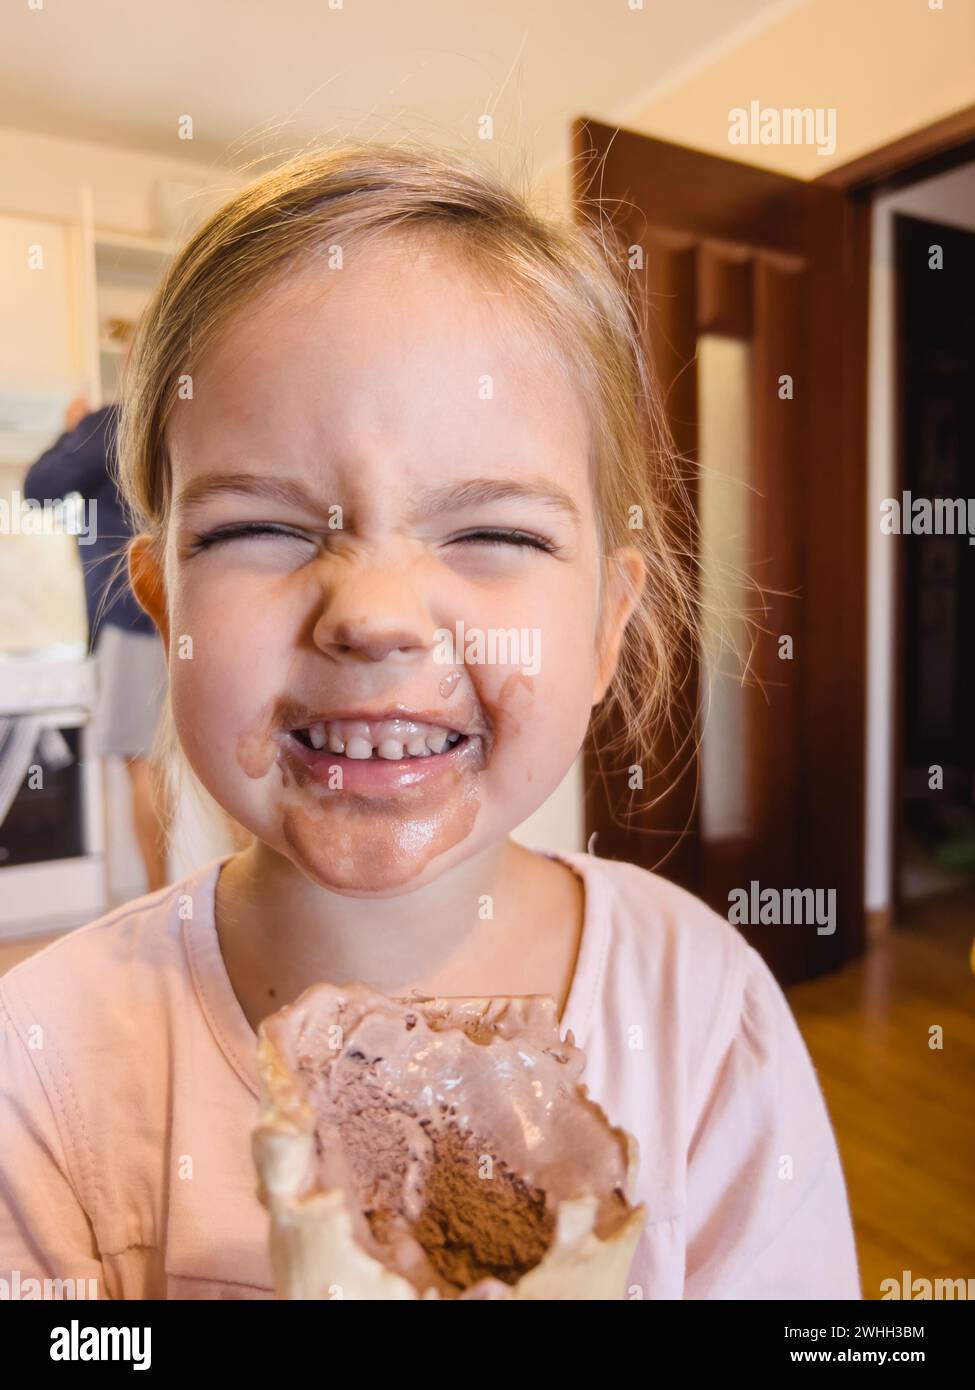 Little smiling girl with a dirty face holds chocolate ice cream in a waffle cup Stock Photo